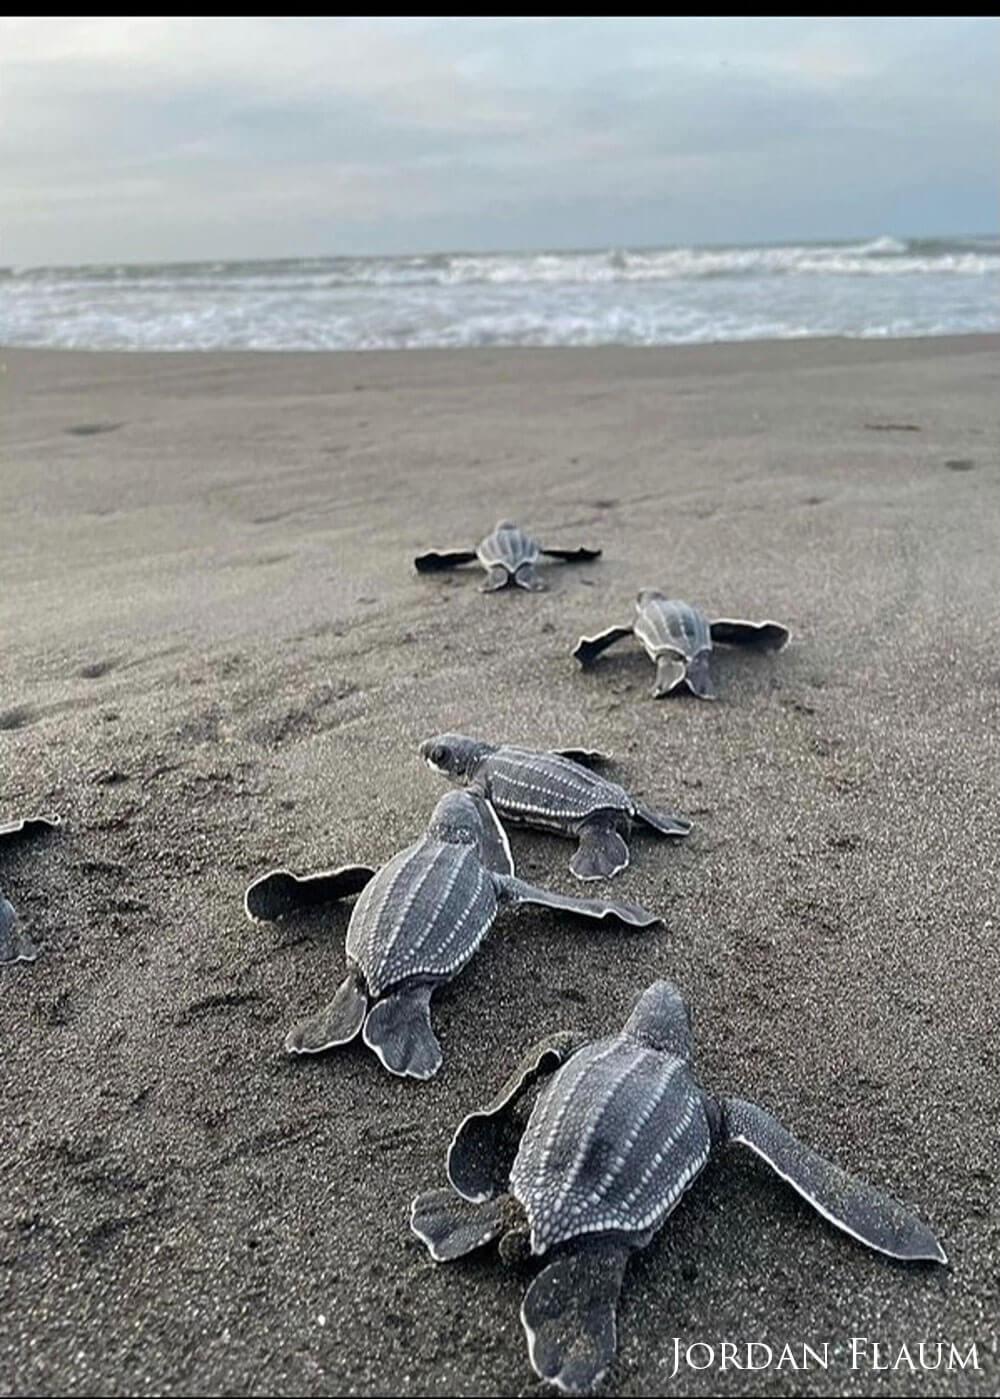 Leatherback turtle hatchlings headed to the ocean.